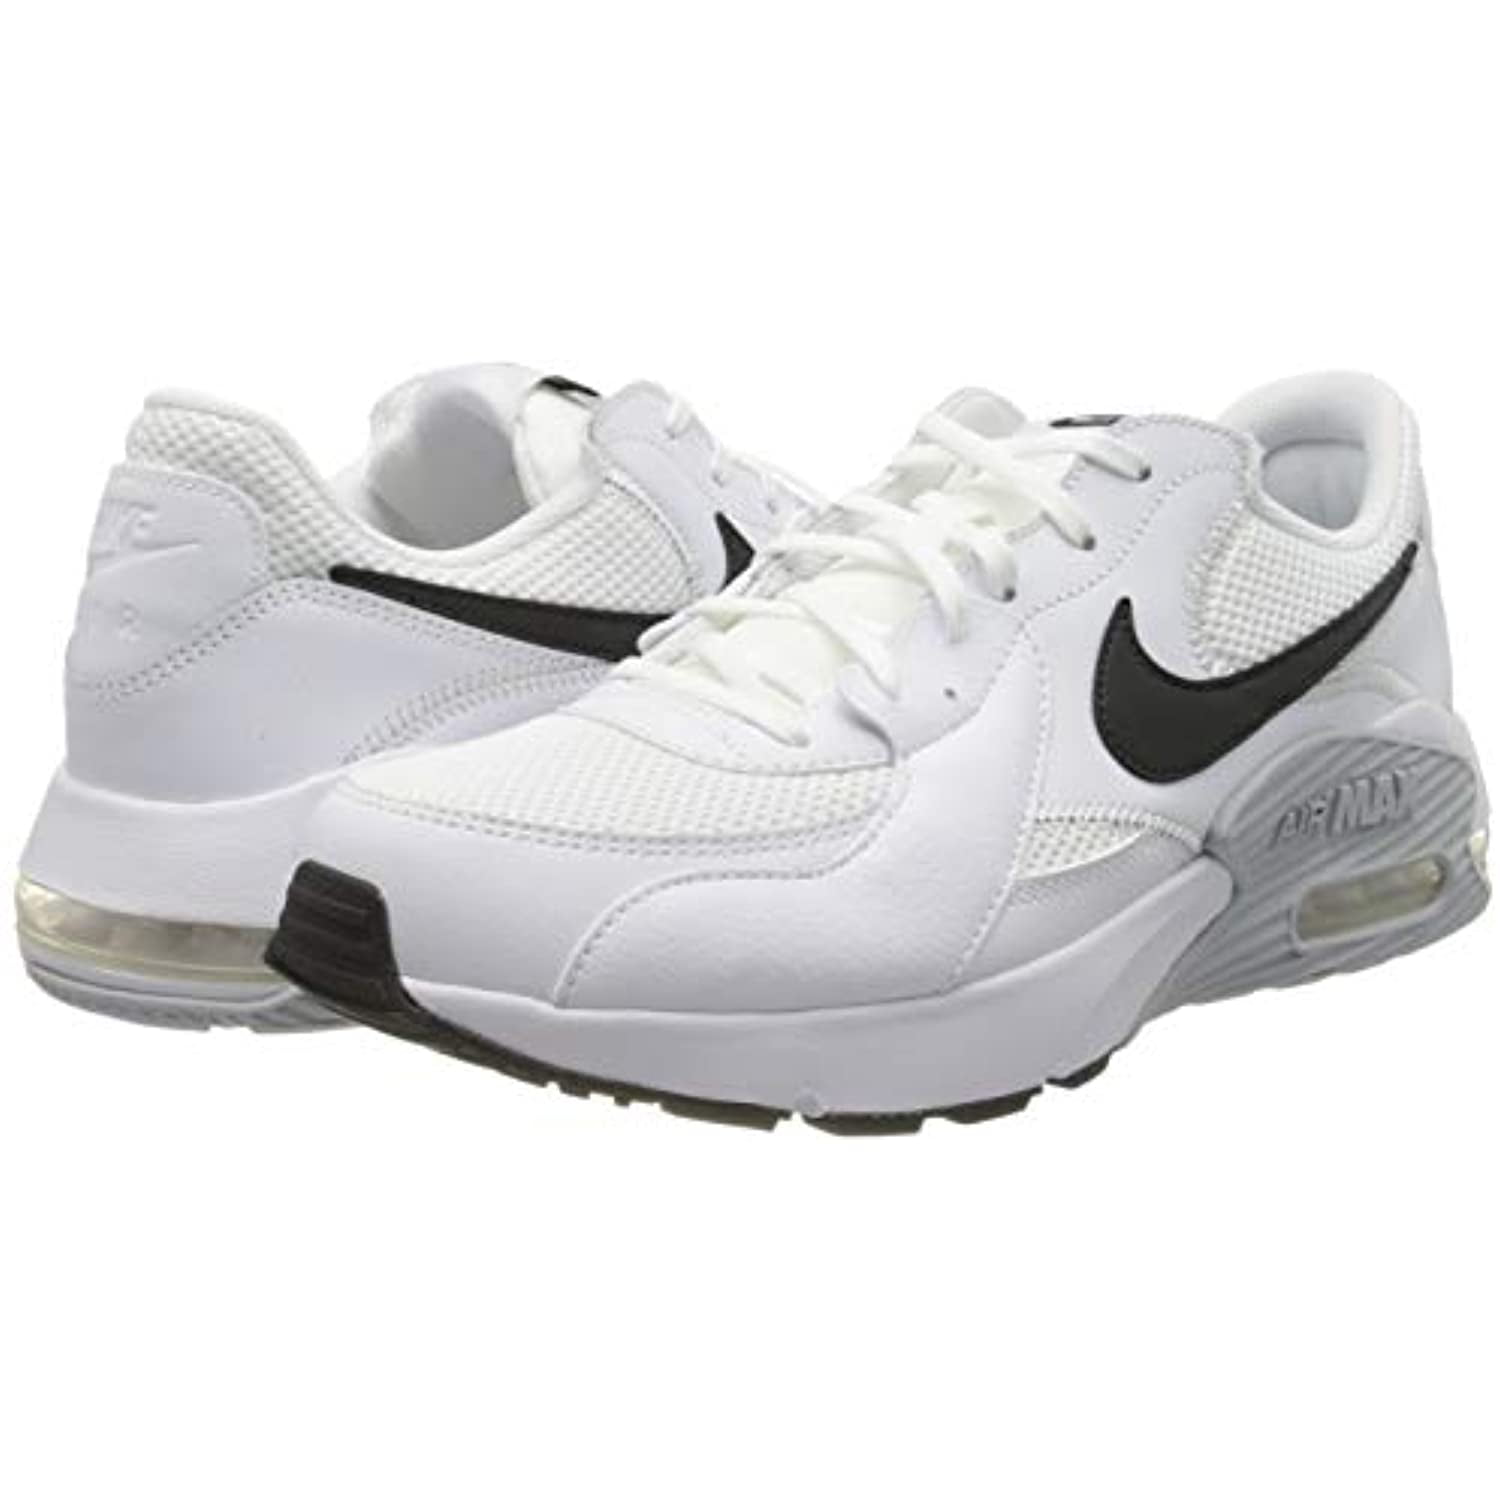 Nike Air Max Excee CD5432-101 White Running Shoe Sneaker Size See ...